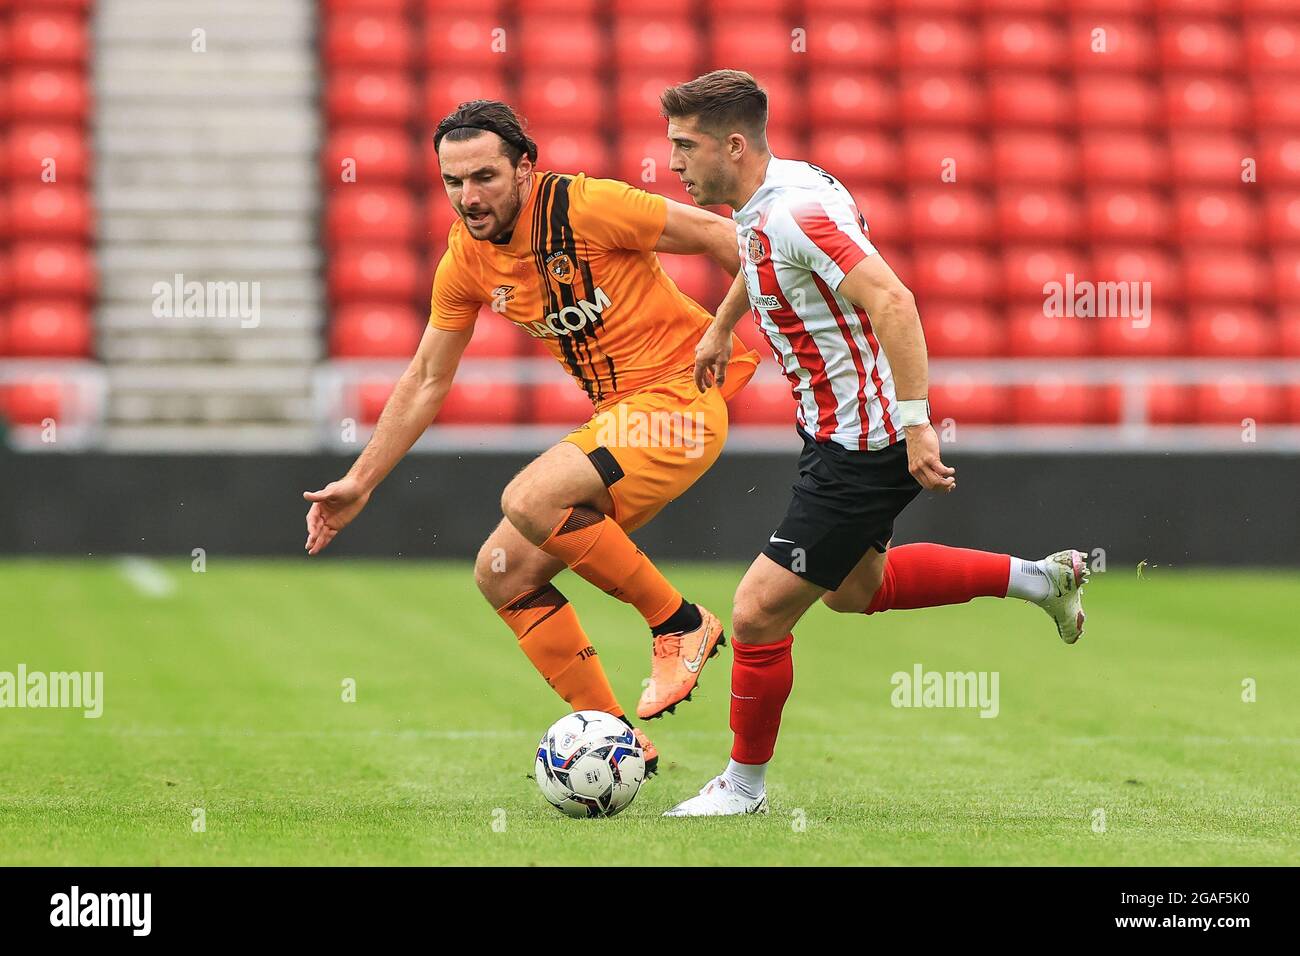 Lewis Coyle #2 of Hull City tracks Lynden Gooch #11 of Sunderland as he breaks with the ball in, on 7/30/2021. (Photo by Mark Cosgrove/News Images/Sipa USA) Credit: Sipa USA/Alamy Live News Stock Photo